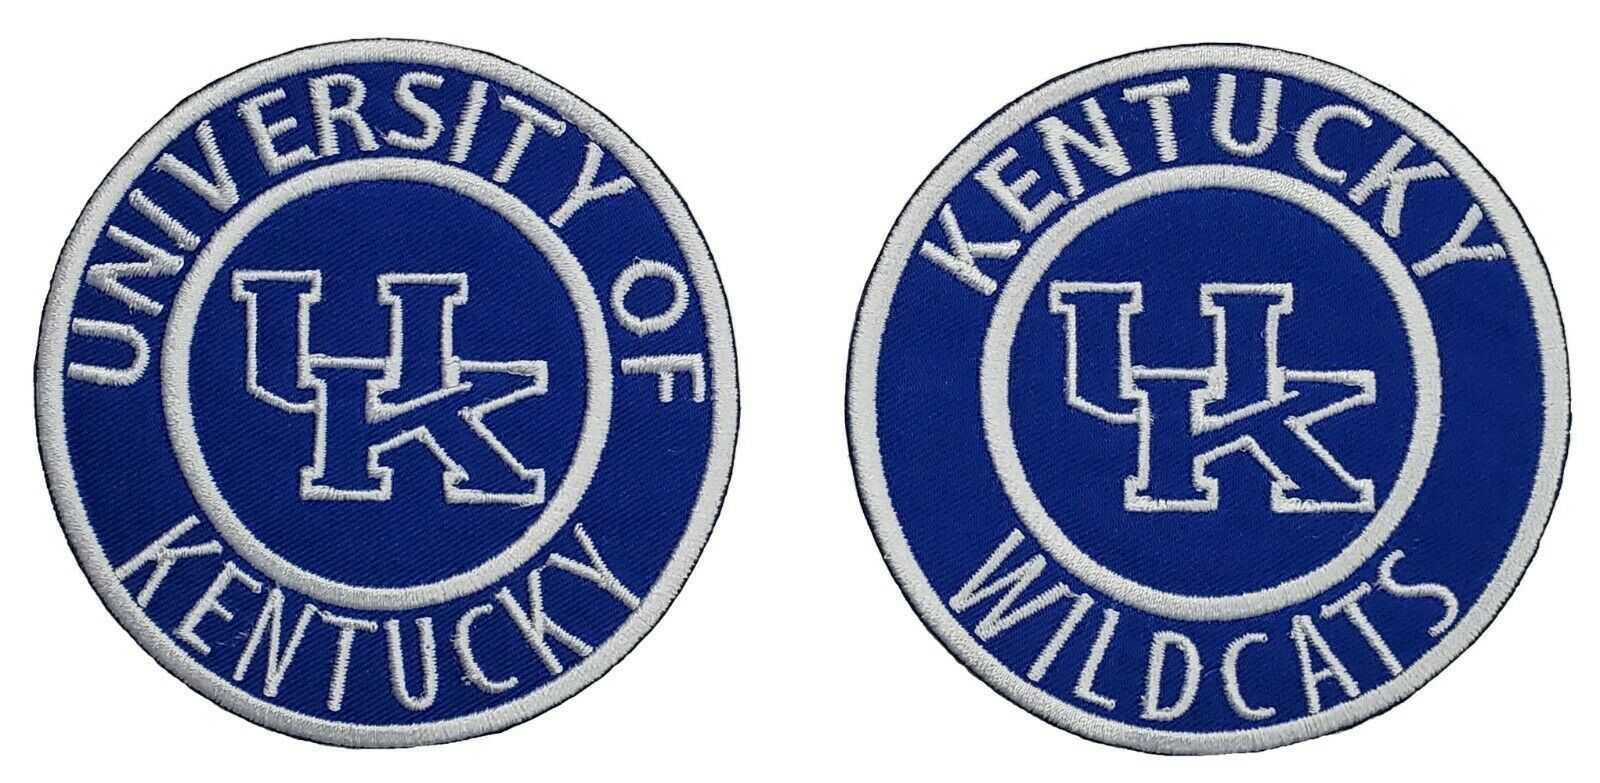 University of Kentucky Wildcats NCAA Football Embroidered Applique Iron On Patch - £6.77 GBP - £8.36 GBP